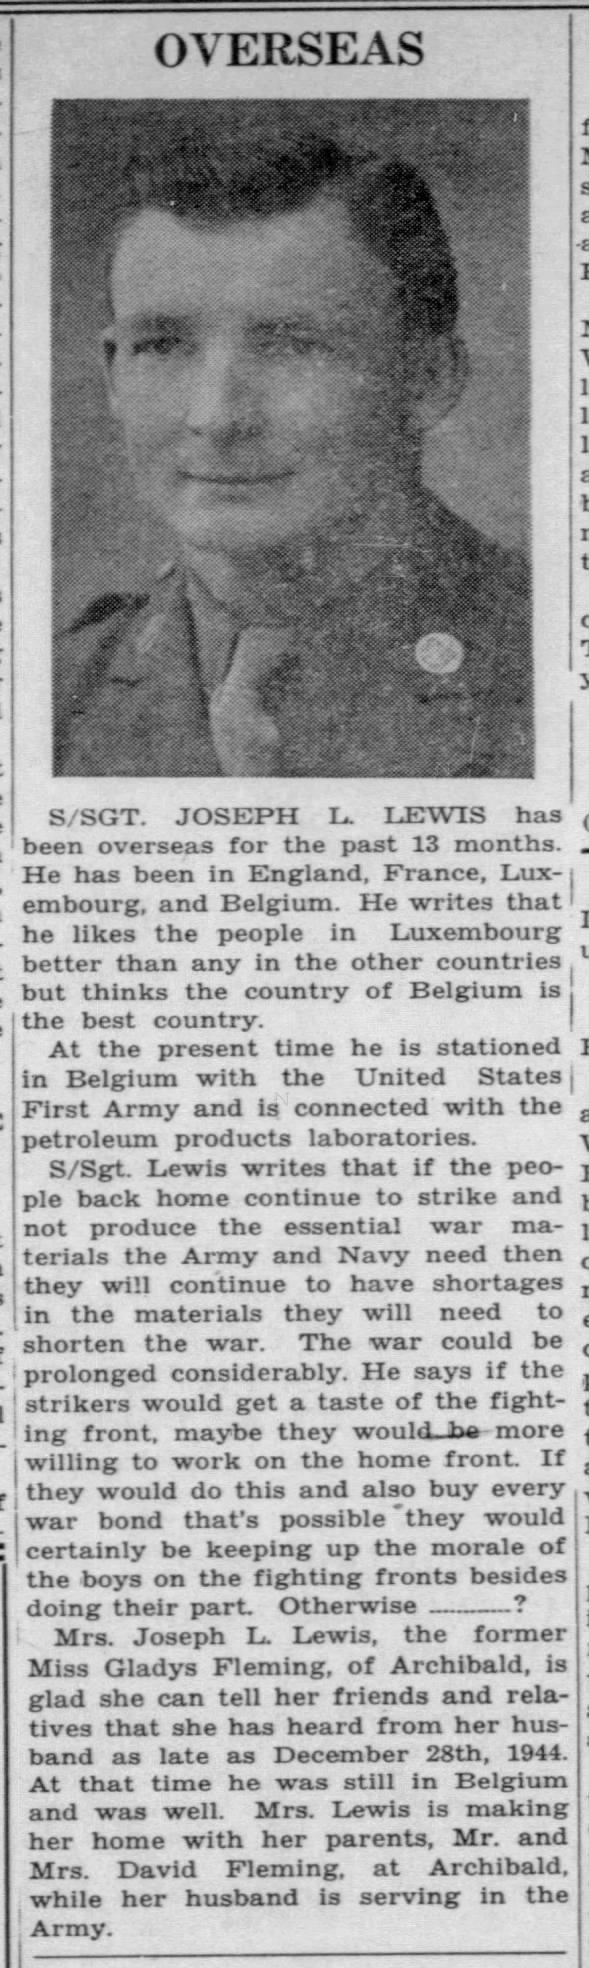 S/Sgt. Joseph L. Lewis stationed in England, France, Etc.